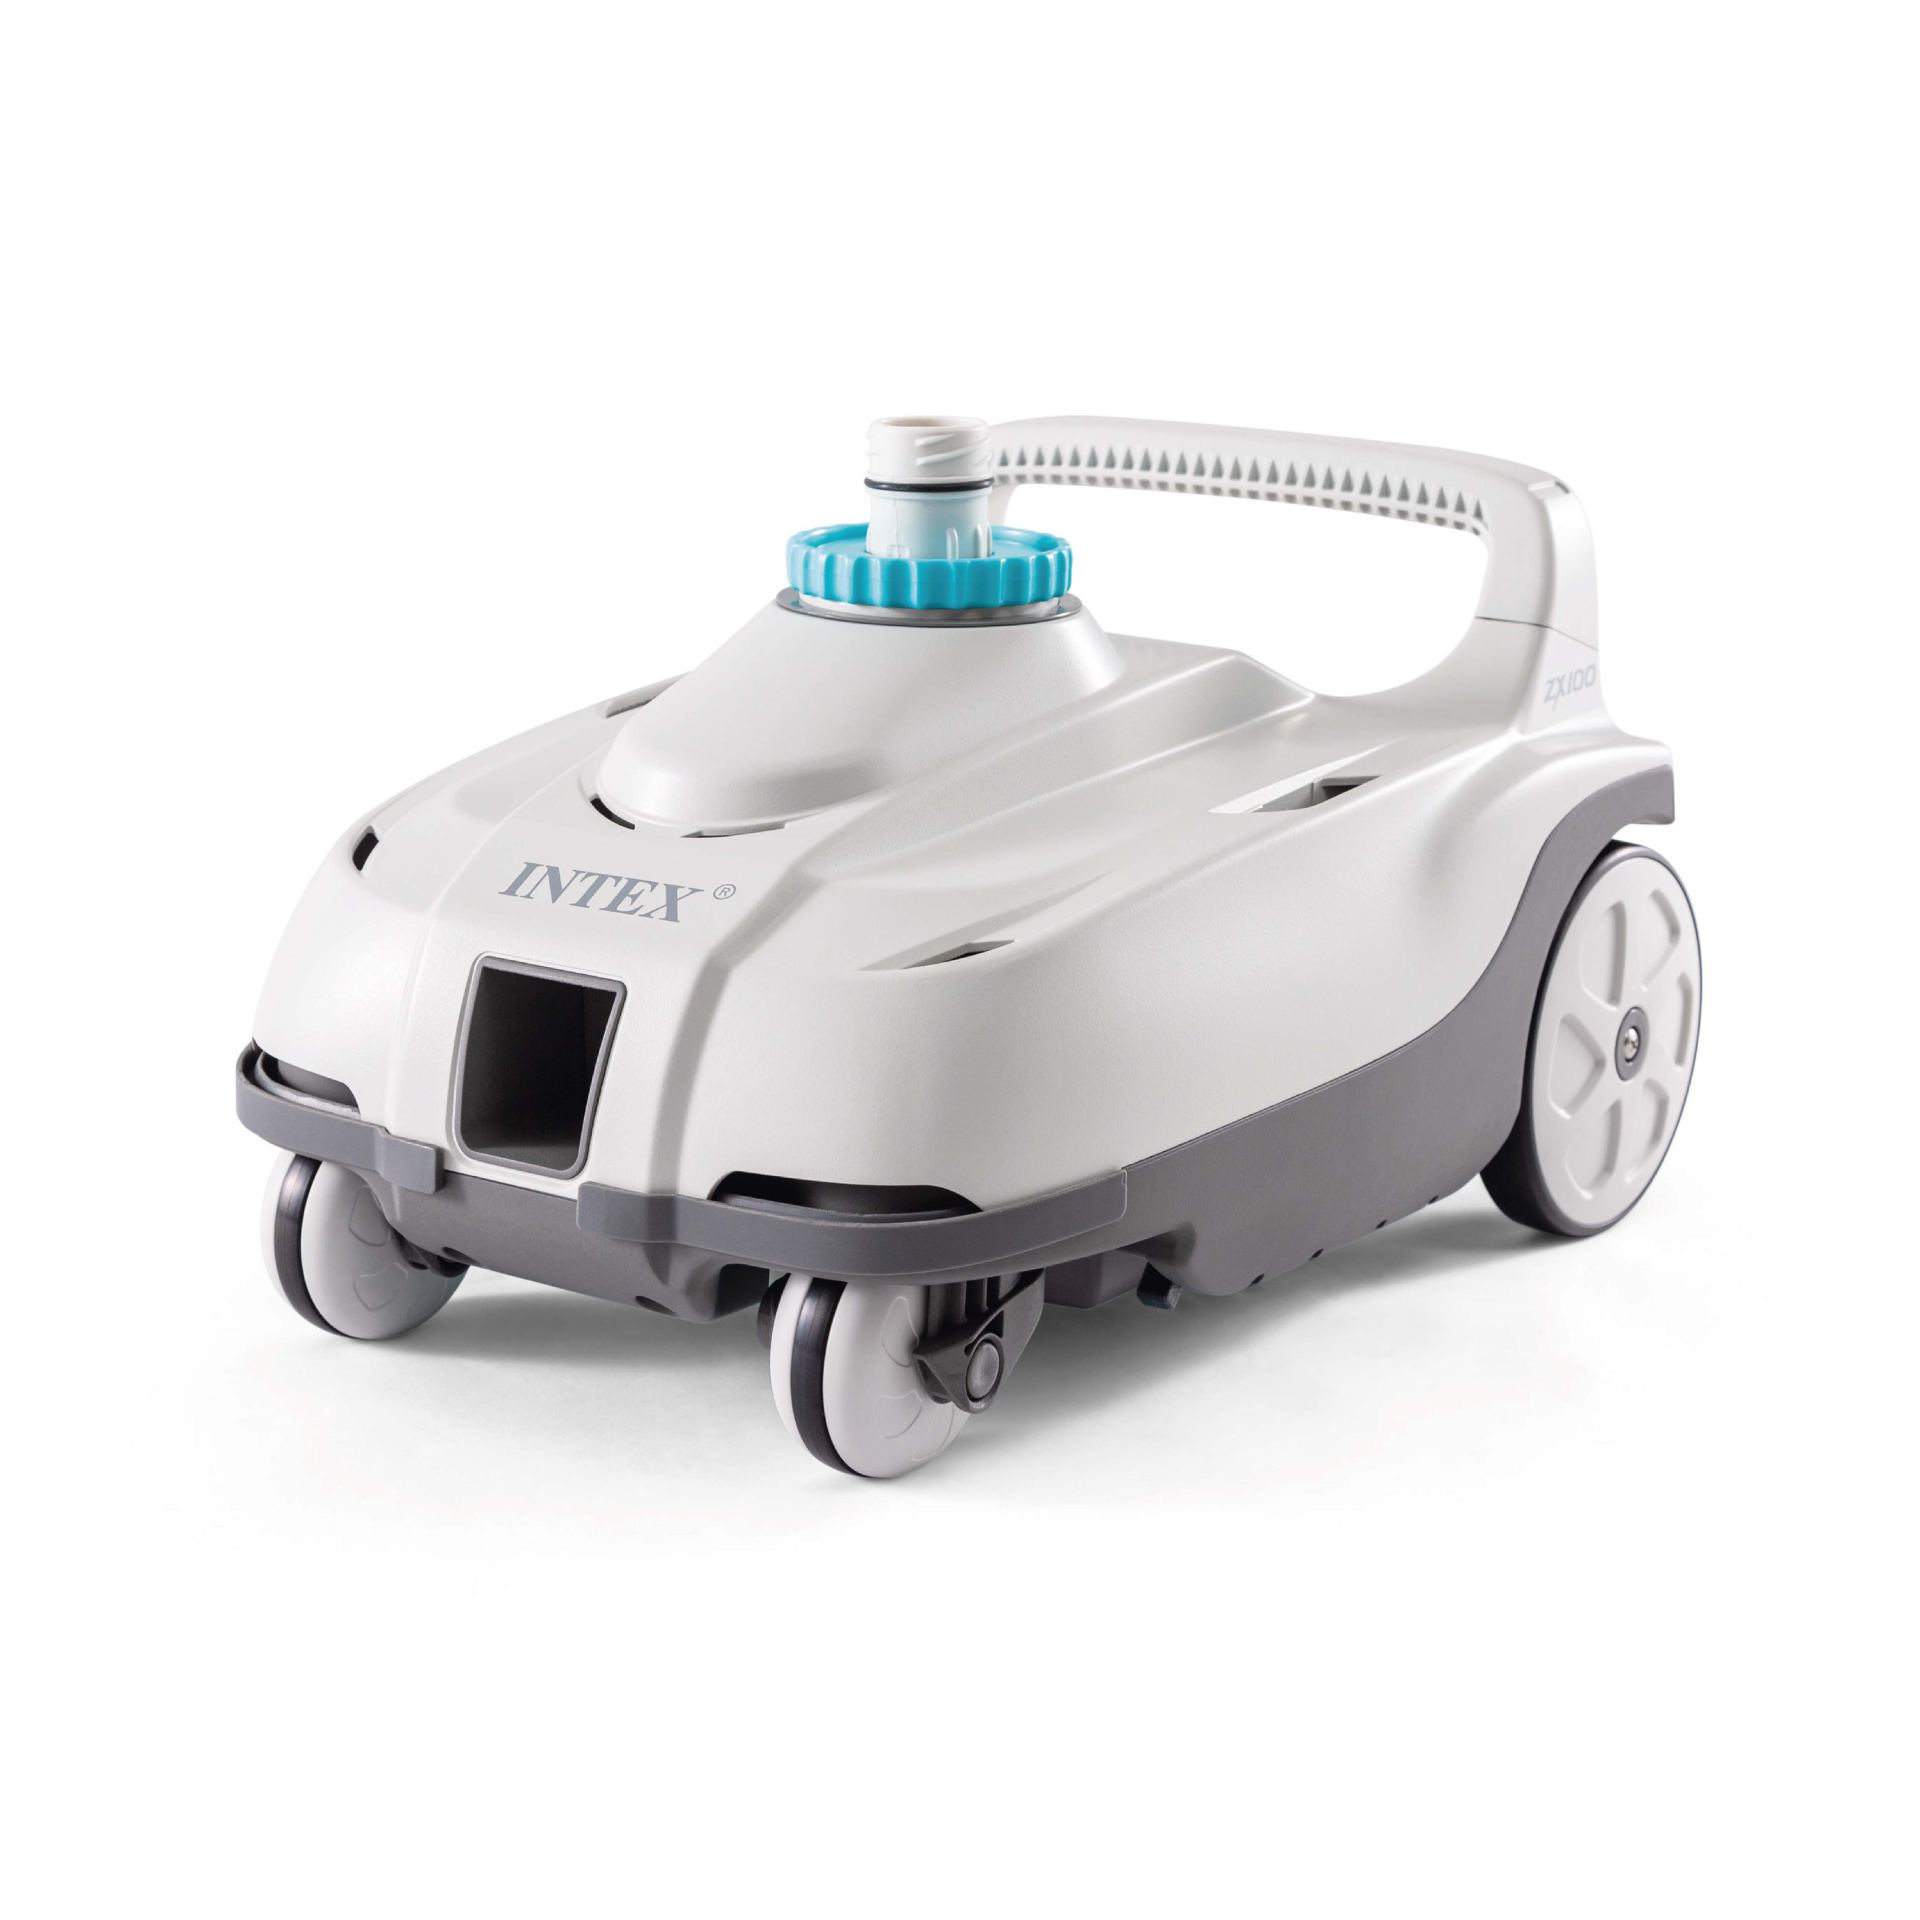 Intex ZX100 deluxe automatic pool cleaner